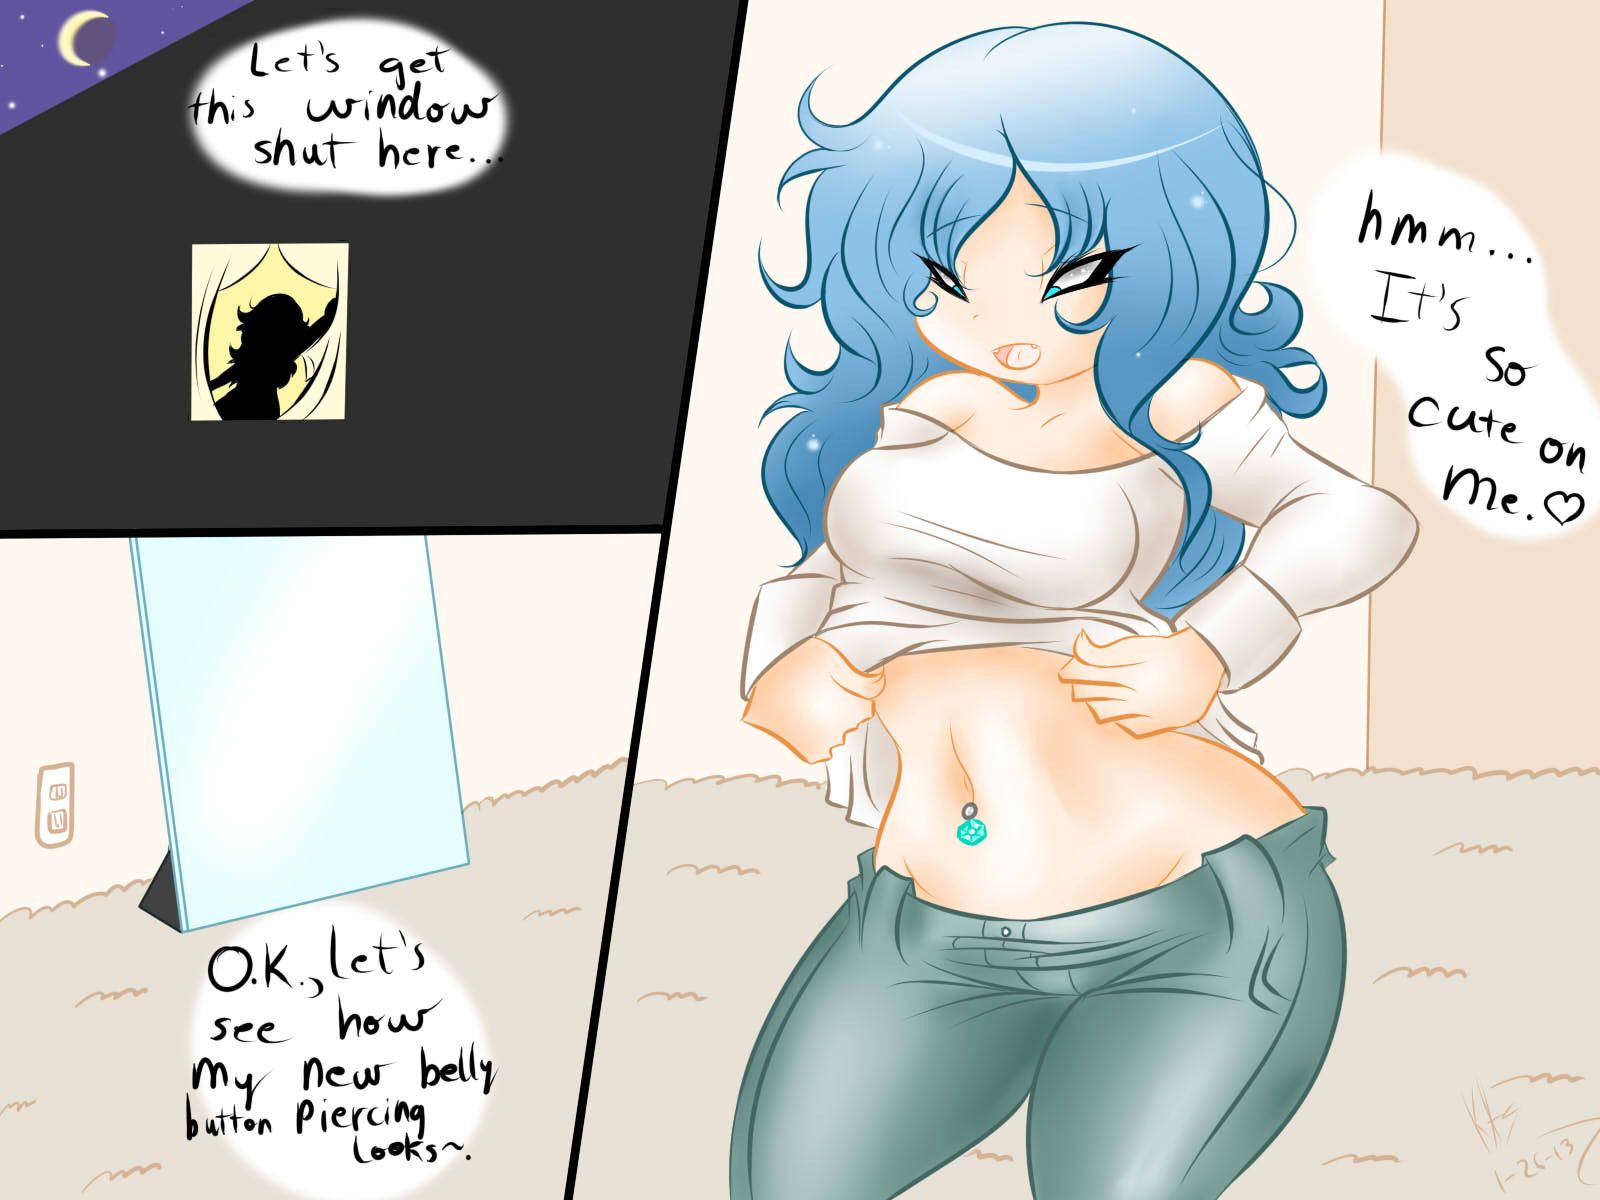 Emerald recommendet expansion sex cartoon